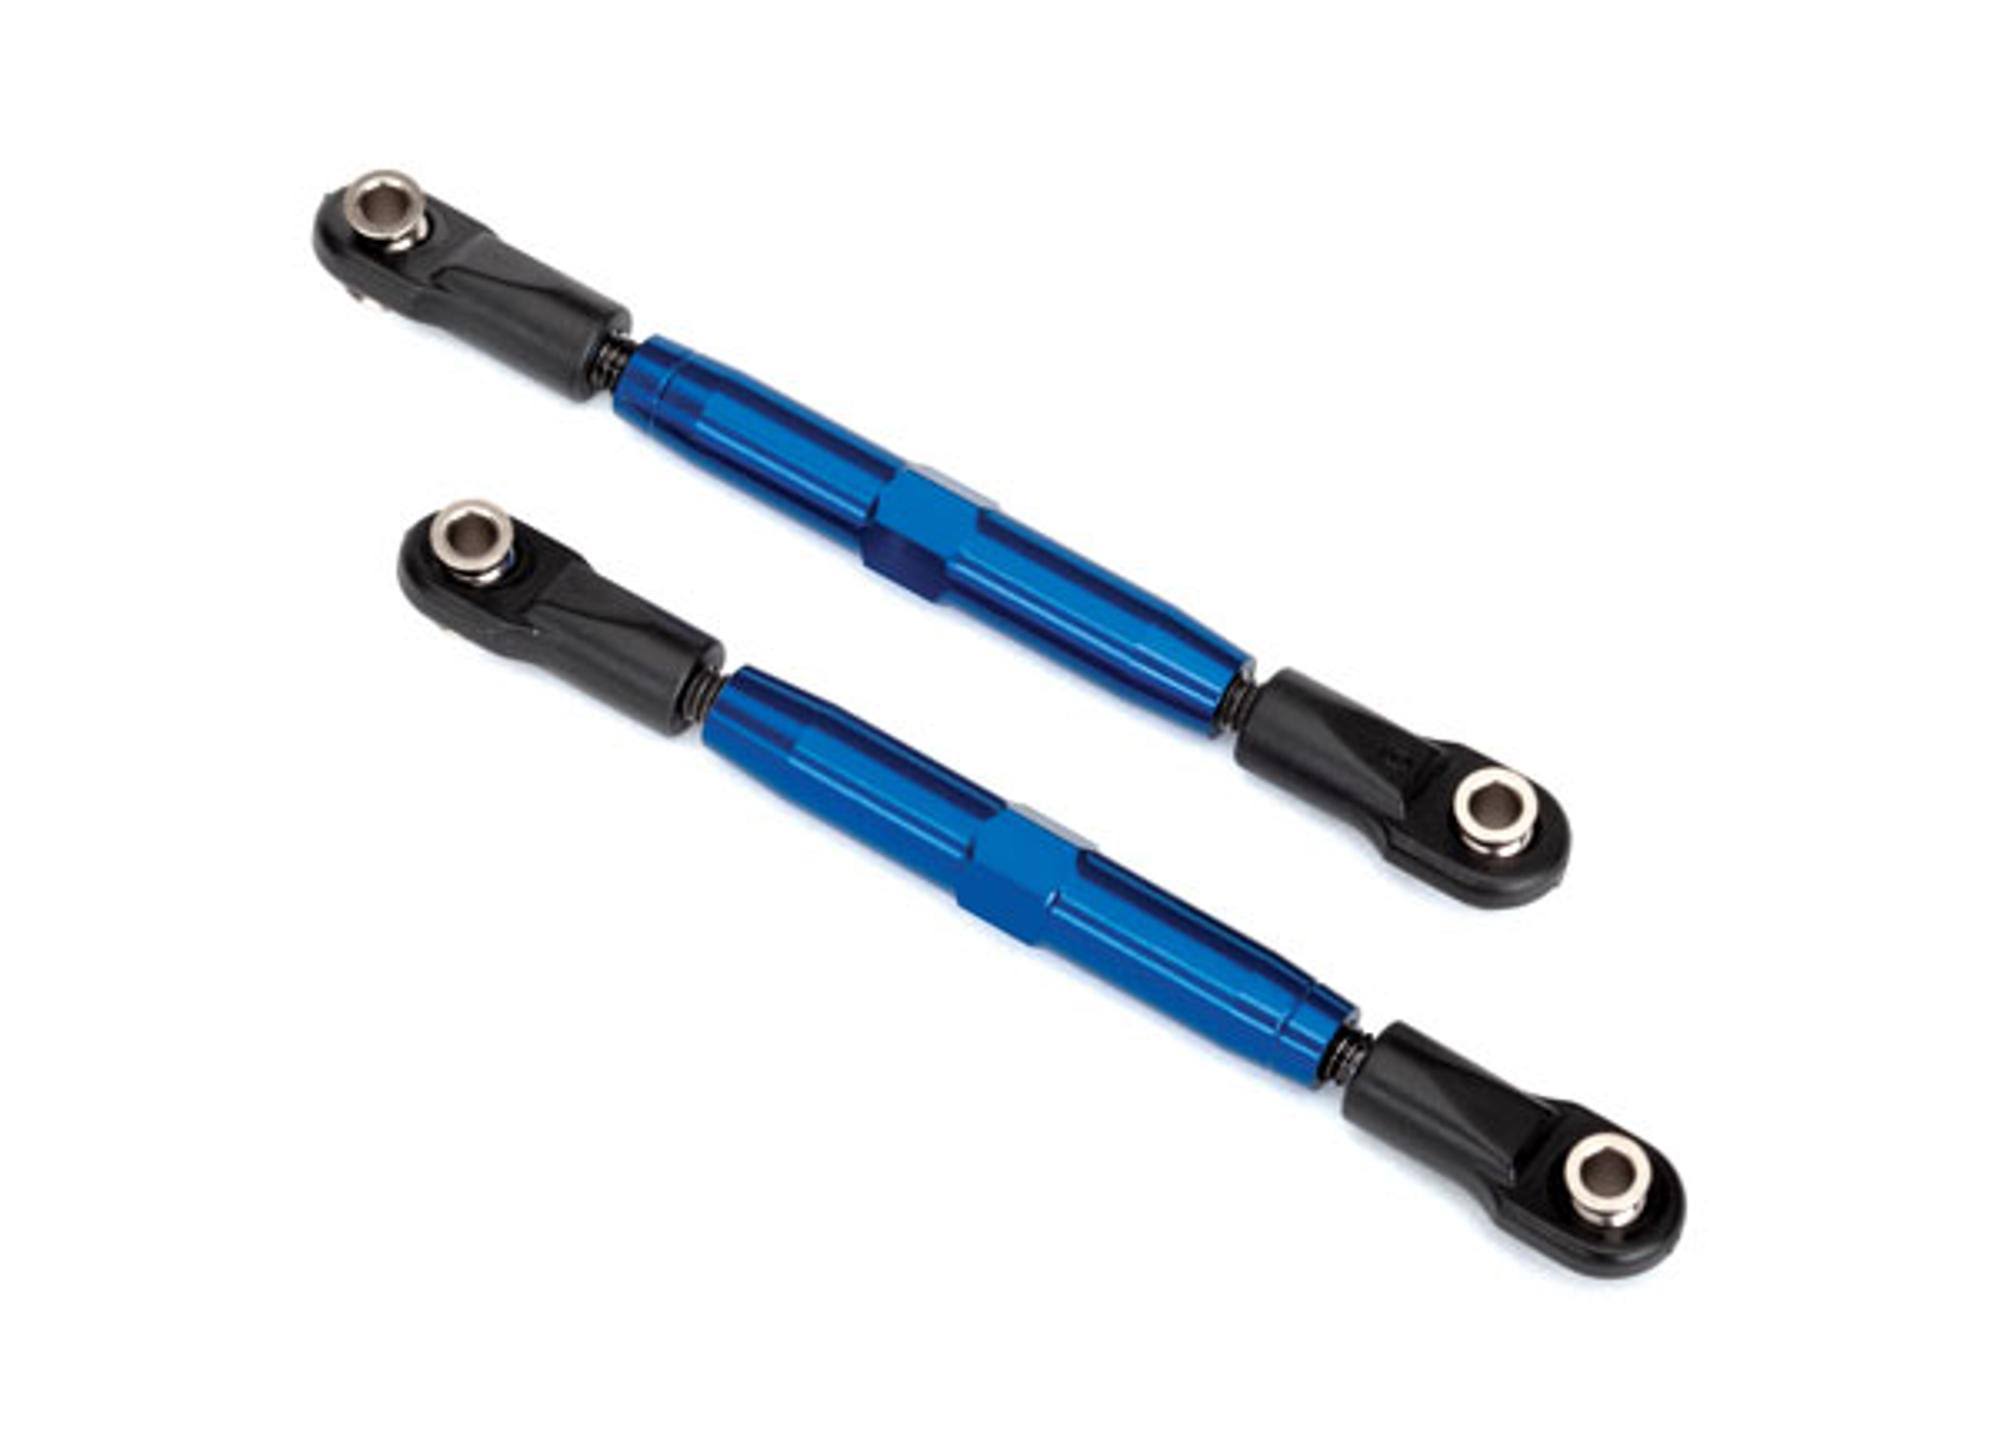 Traxxas TRA6743X Aluminum Front Camber Links - Blue, 83mm